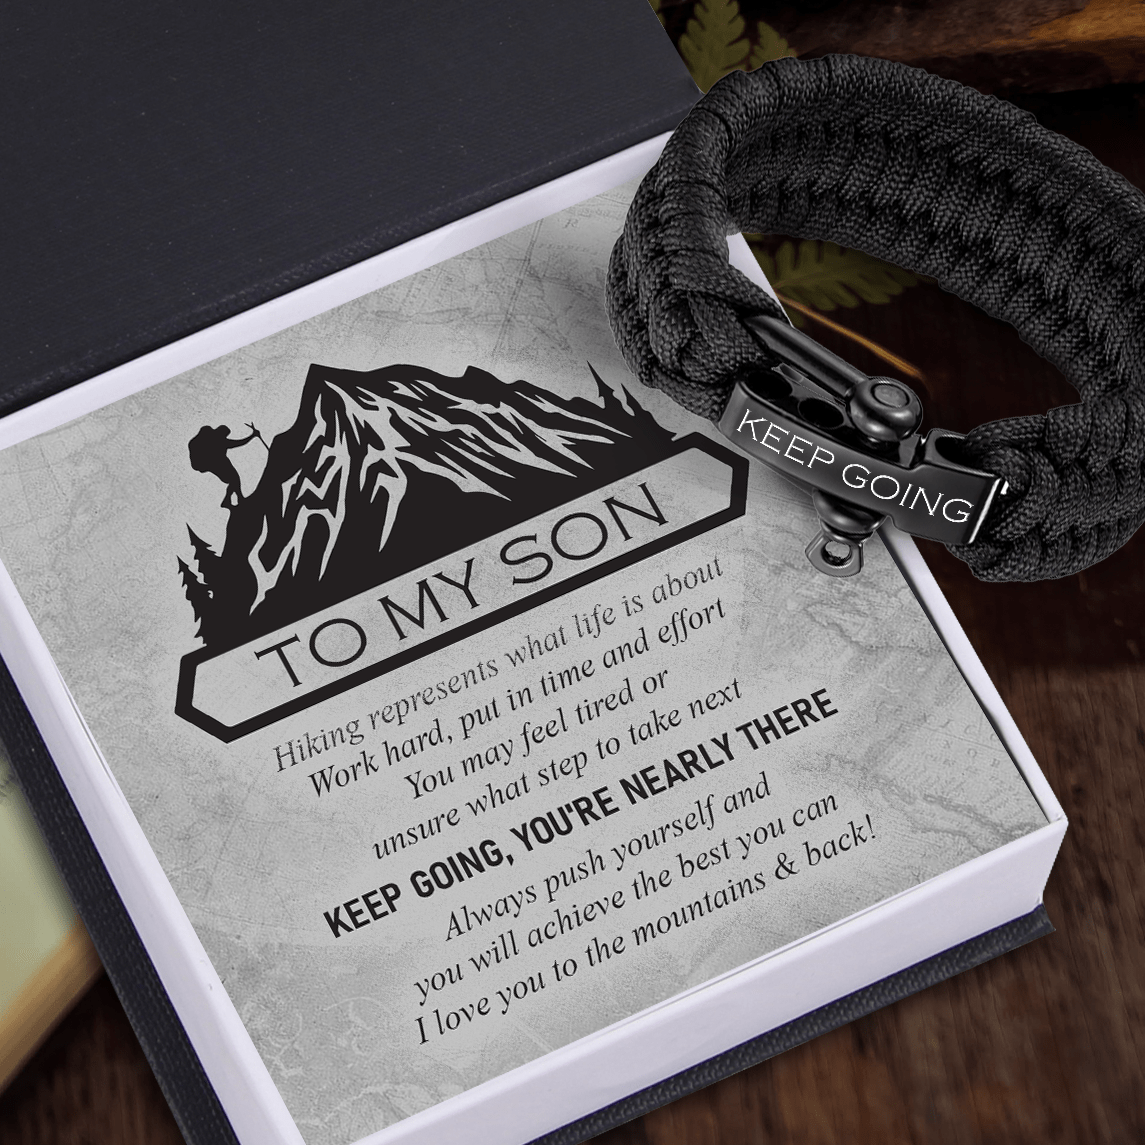 Paracord Rope Bracelet - Hiking - To My Son - Always Push Yourself And You Will Achieve The Best You Can - Gbxa16004